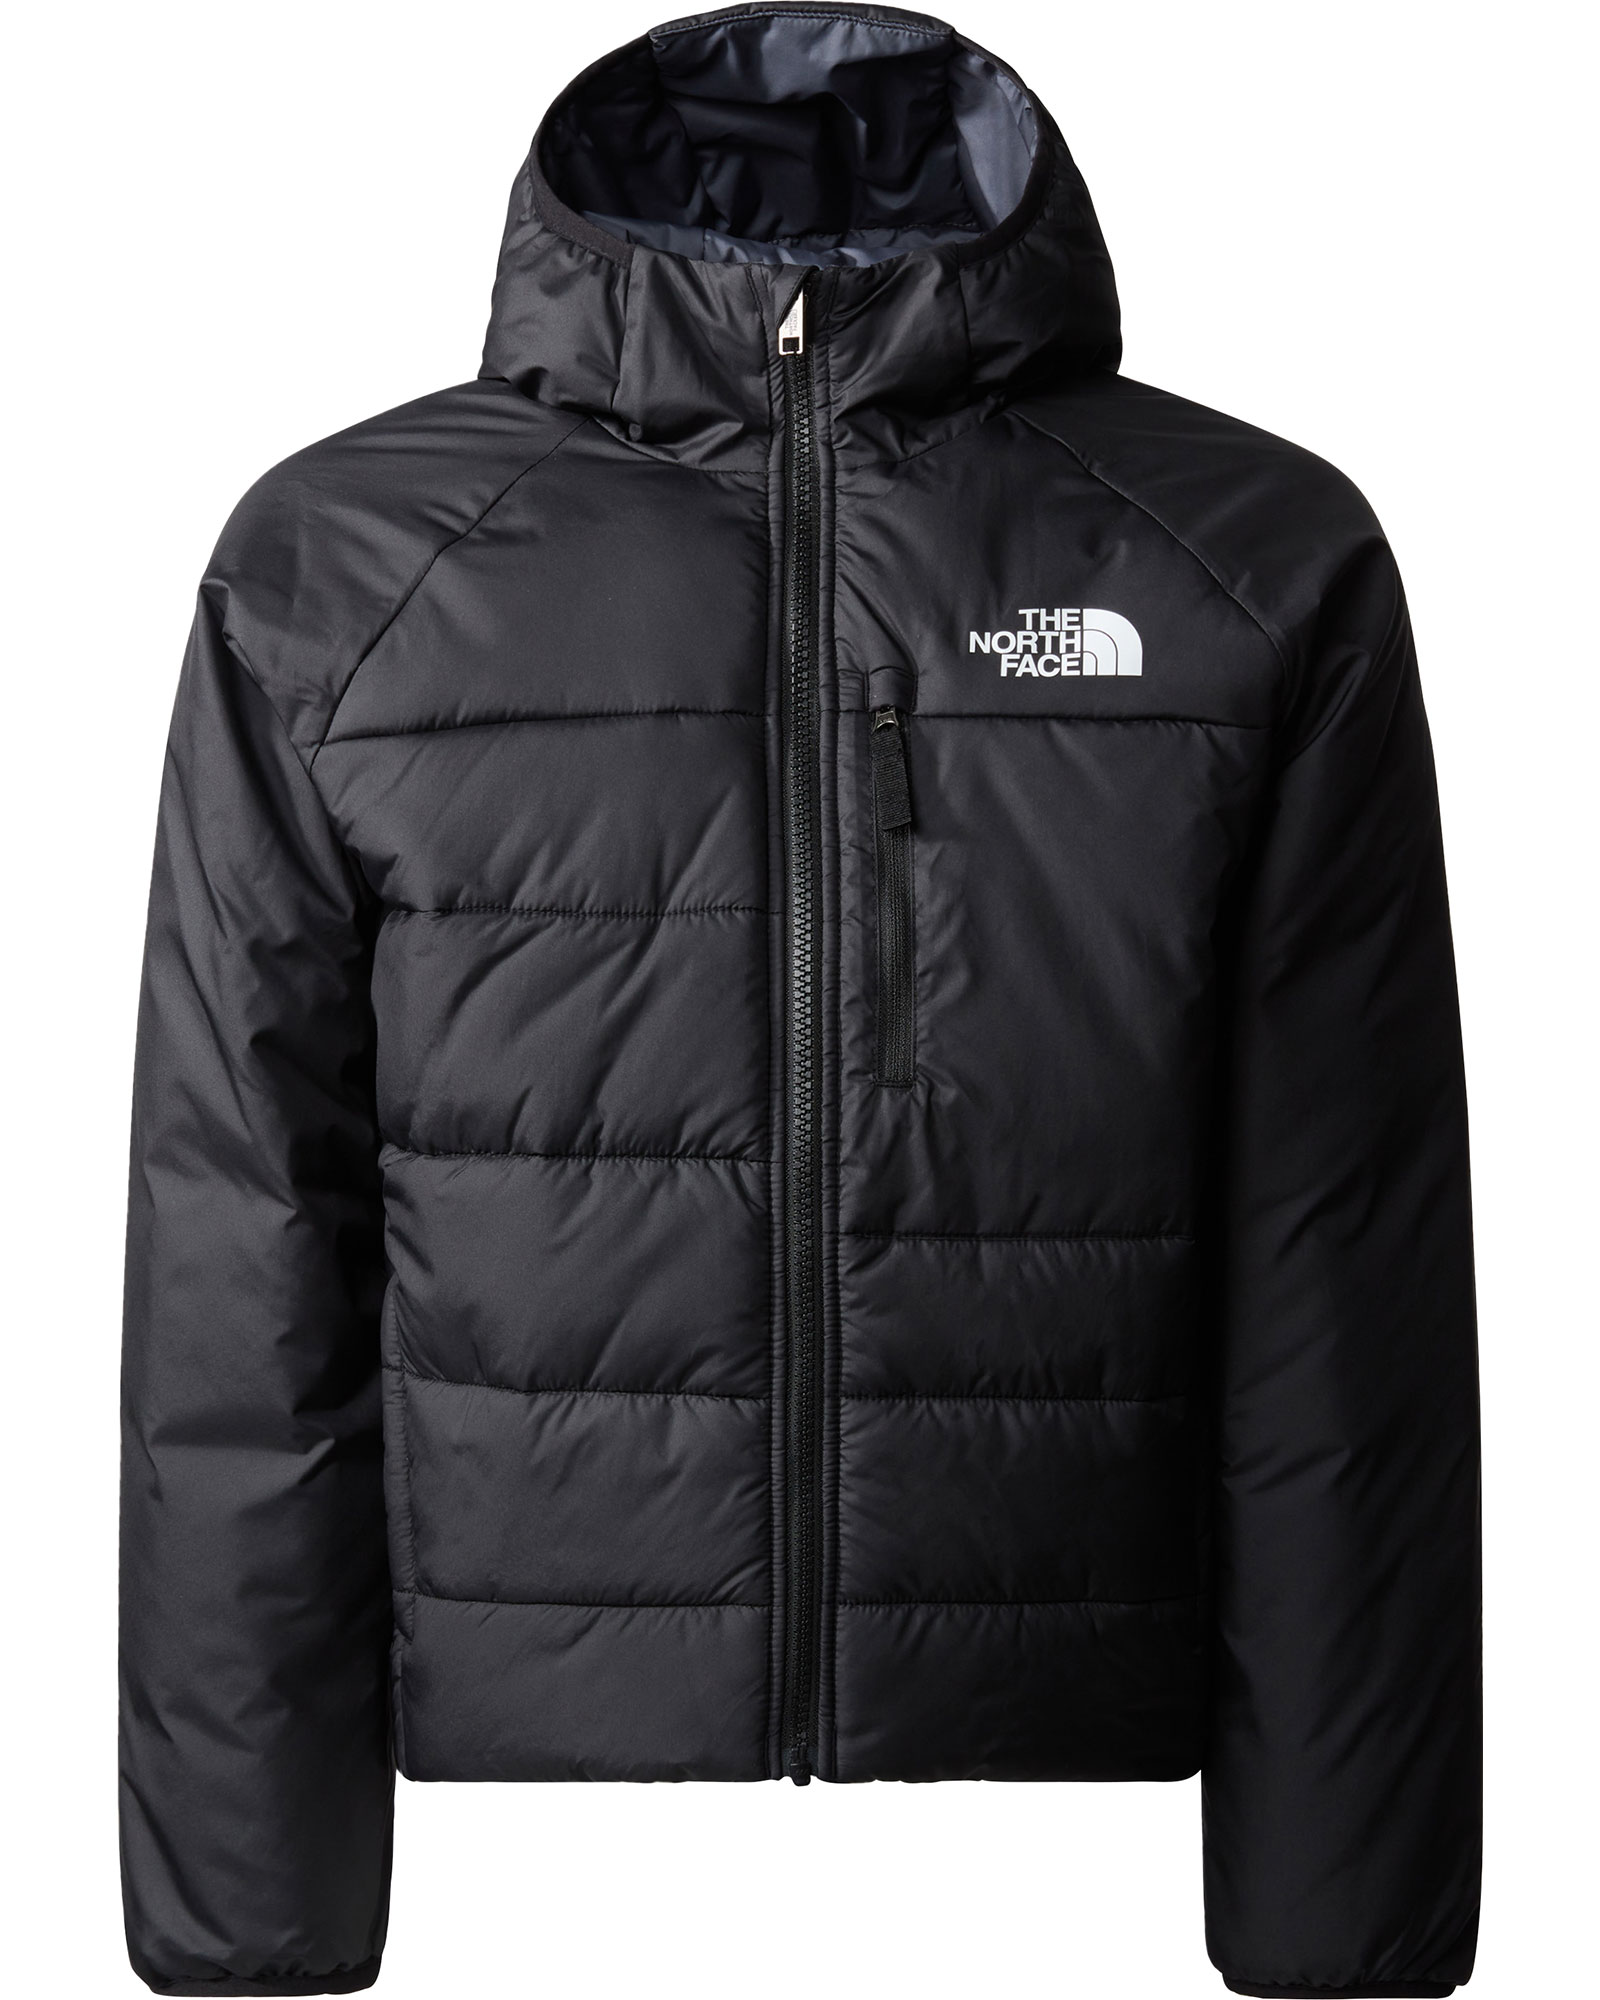 The North Face Boy’s Reversible Perrito Insulated Jacket - TNF Black S